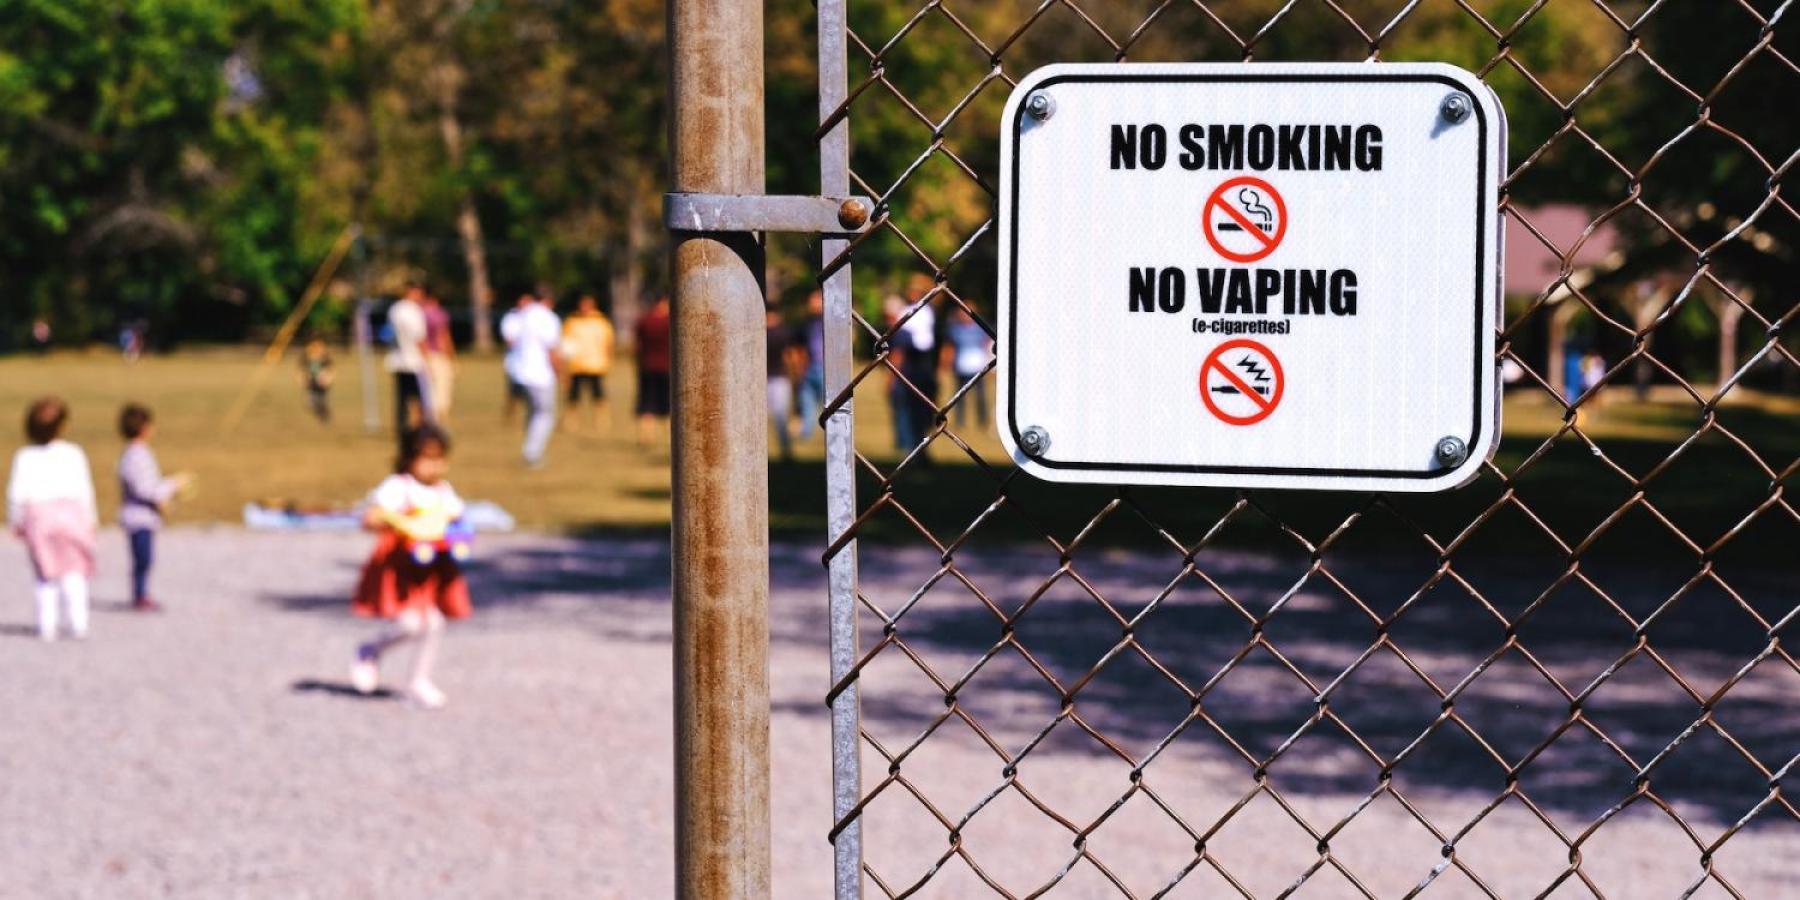 No smoking and no vaping sign in a children park 